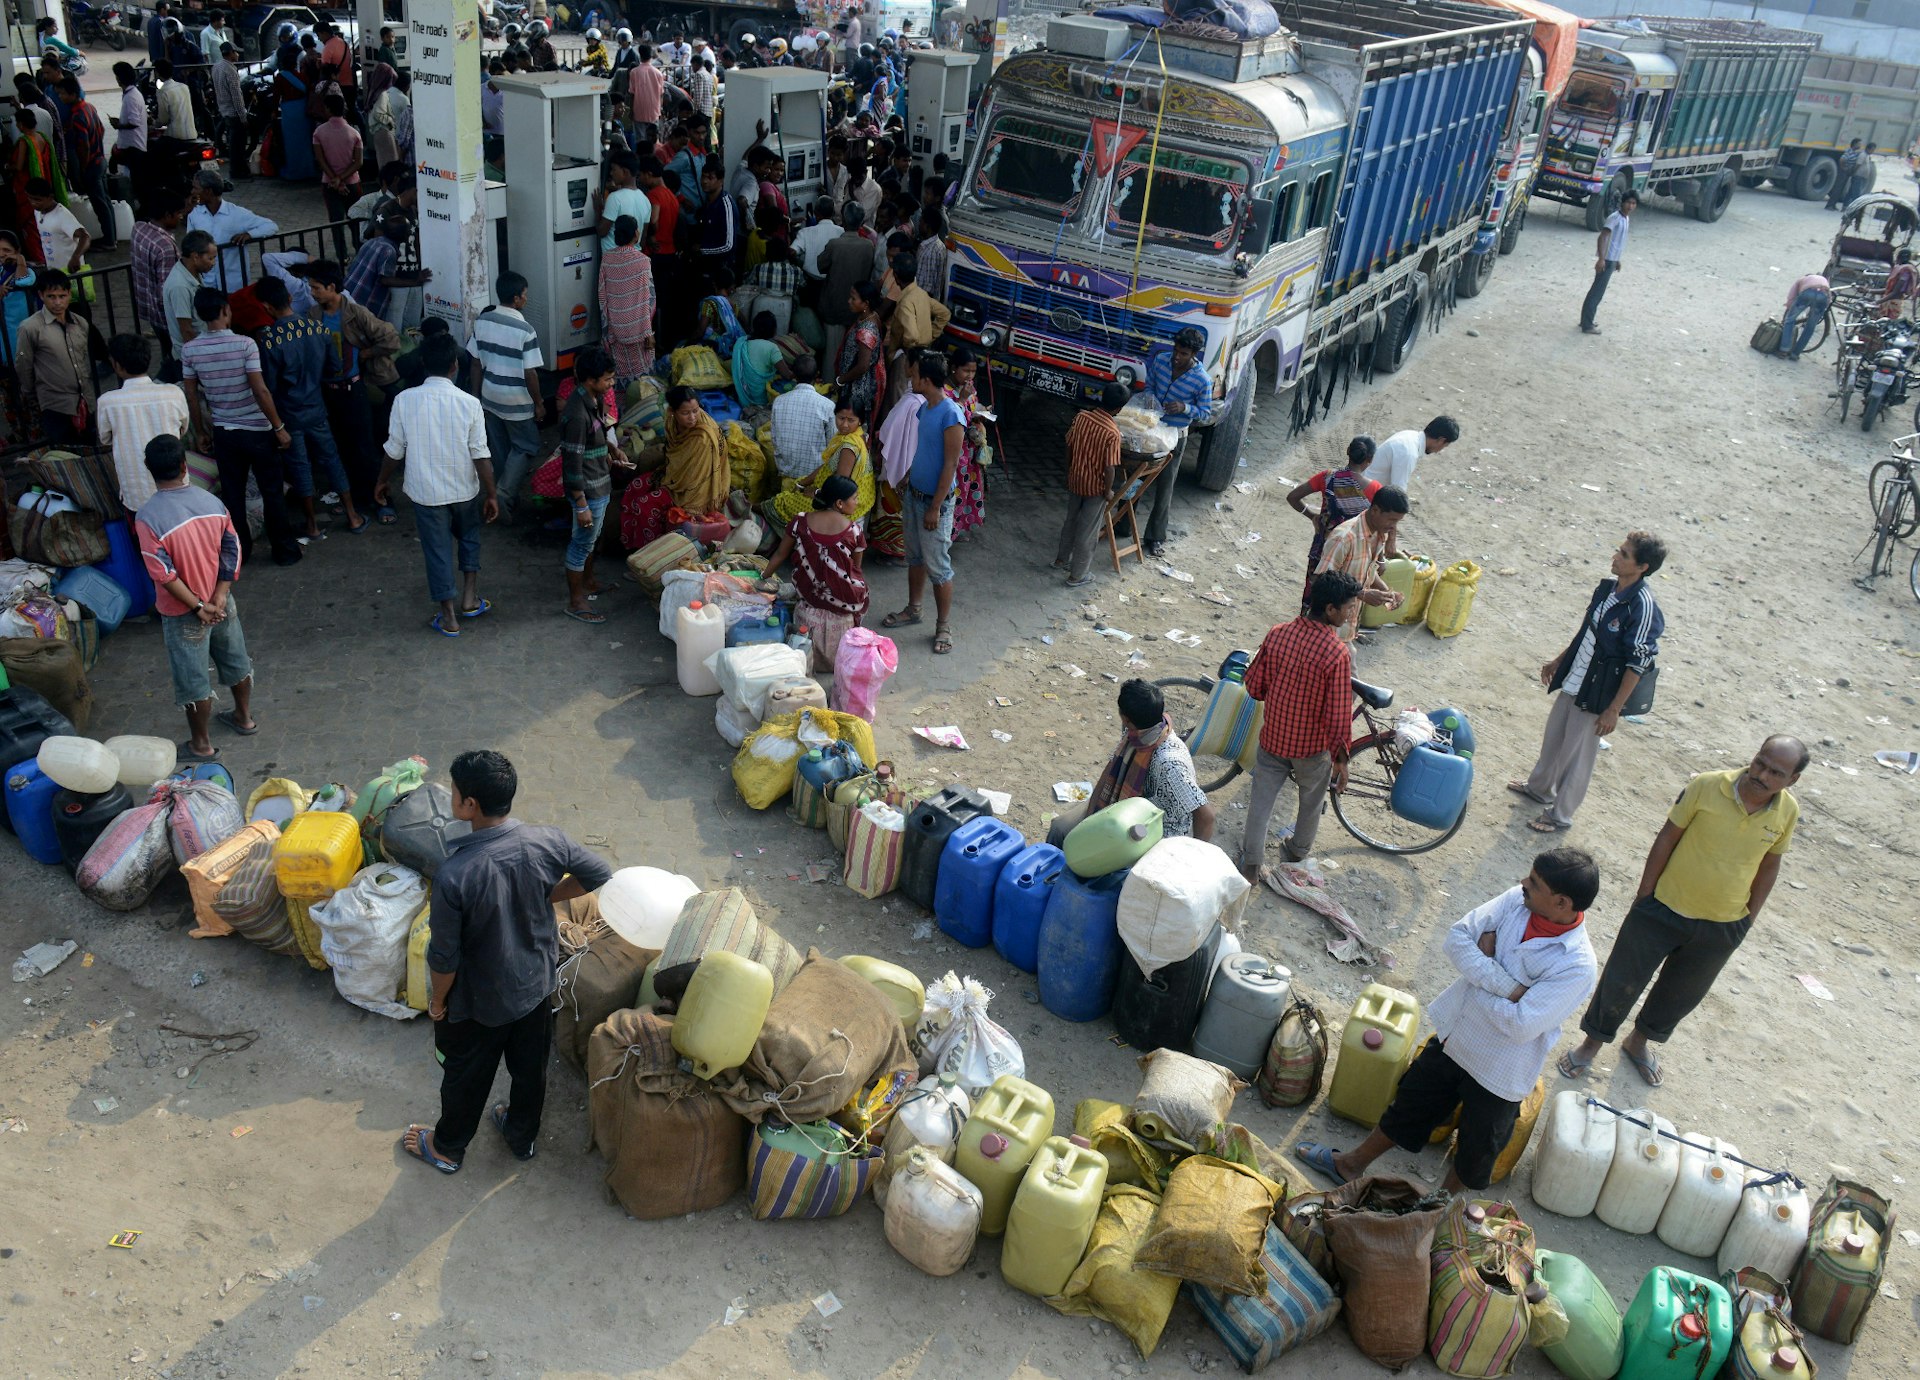 People queue for fuel at the Nepal border in Kakarbhitta. Image by DIPTENDU DUTTA / Stringer / Getty Images